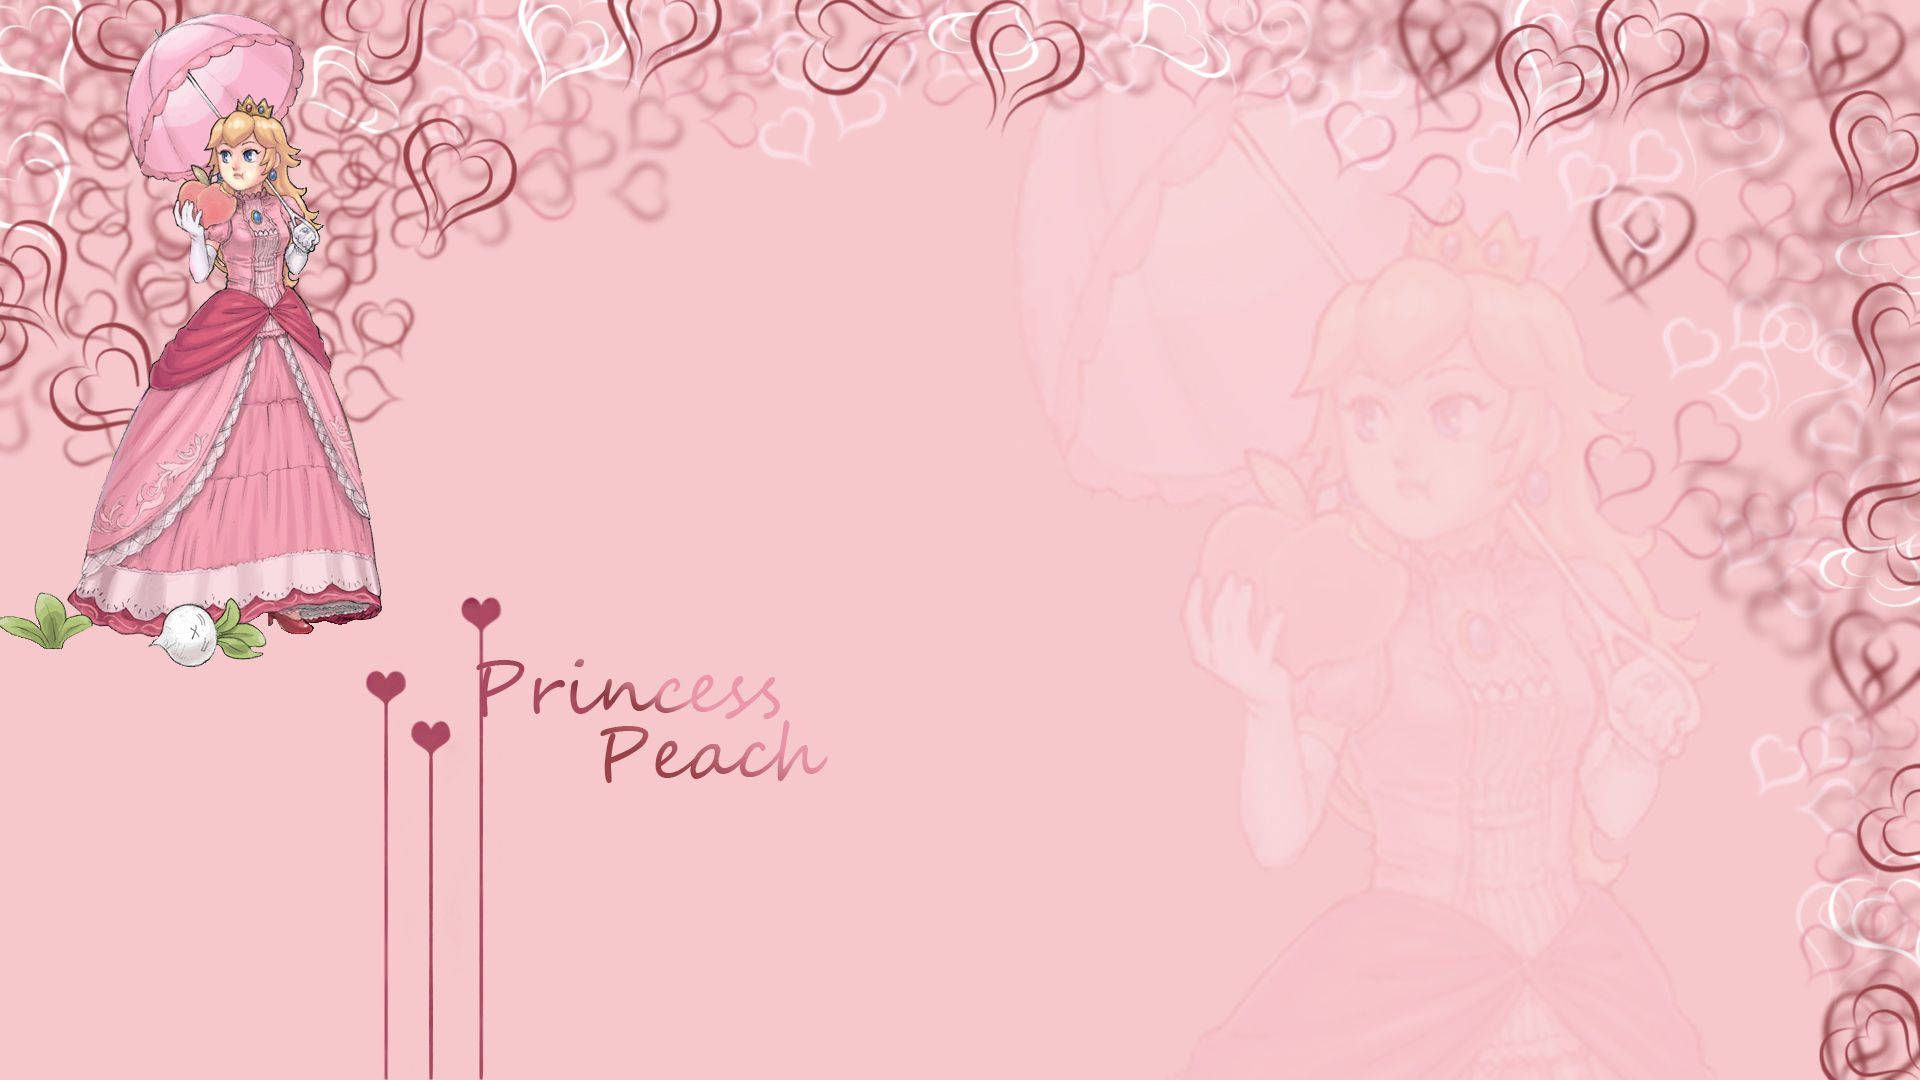 A pink background with Princess Peach's name on it - Princess Peach, Super Mario